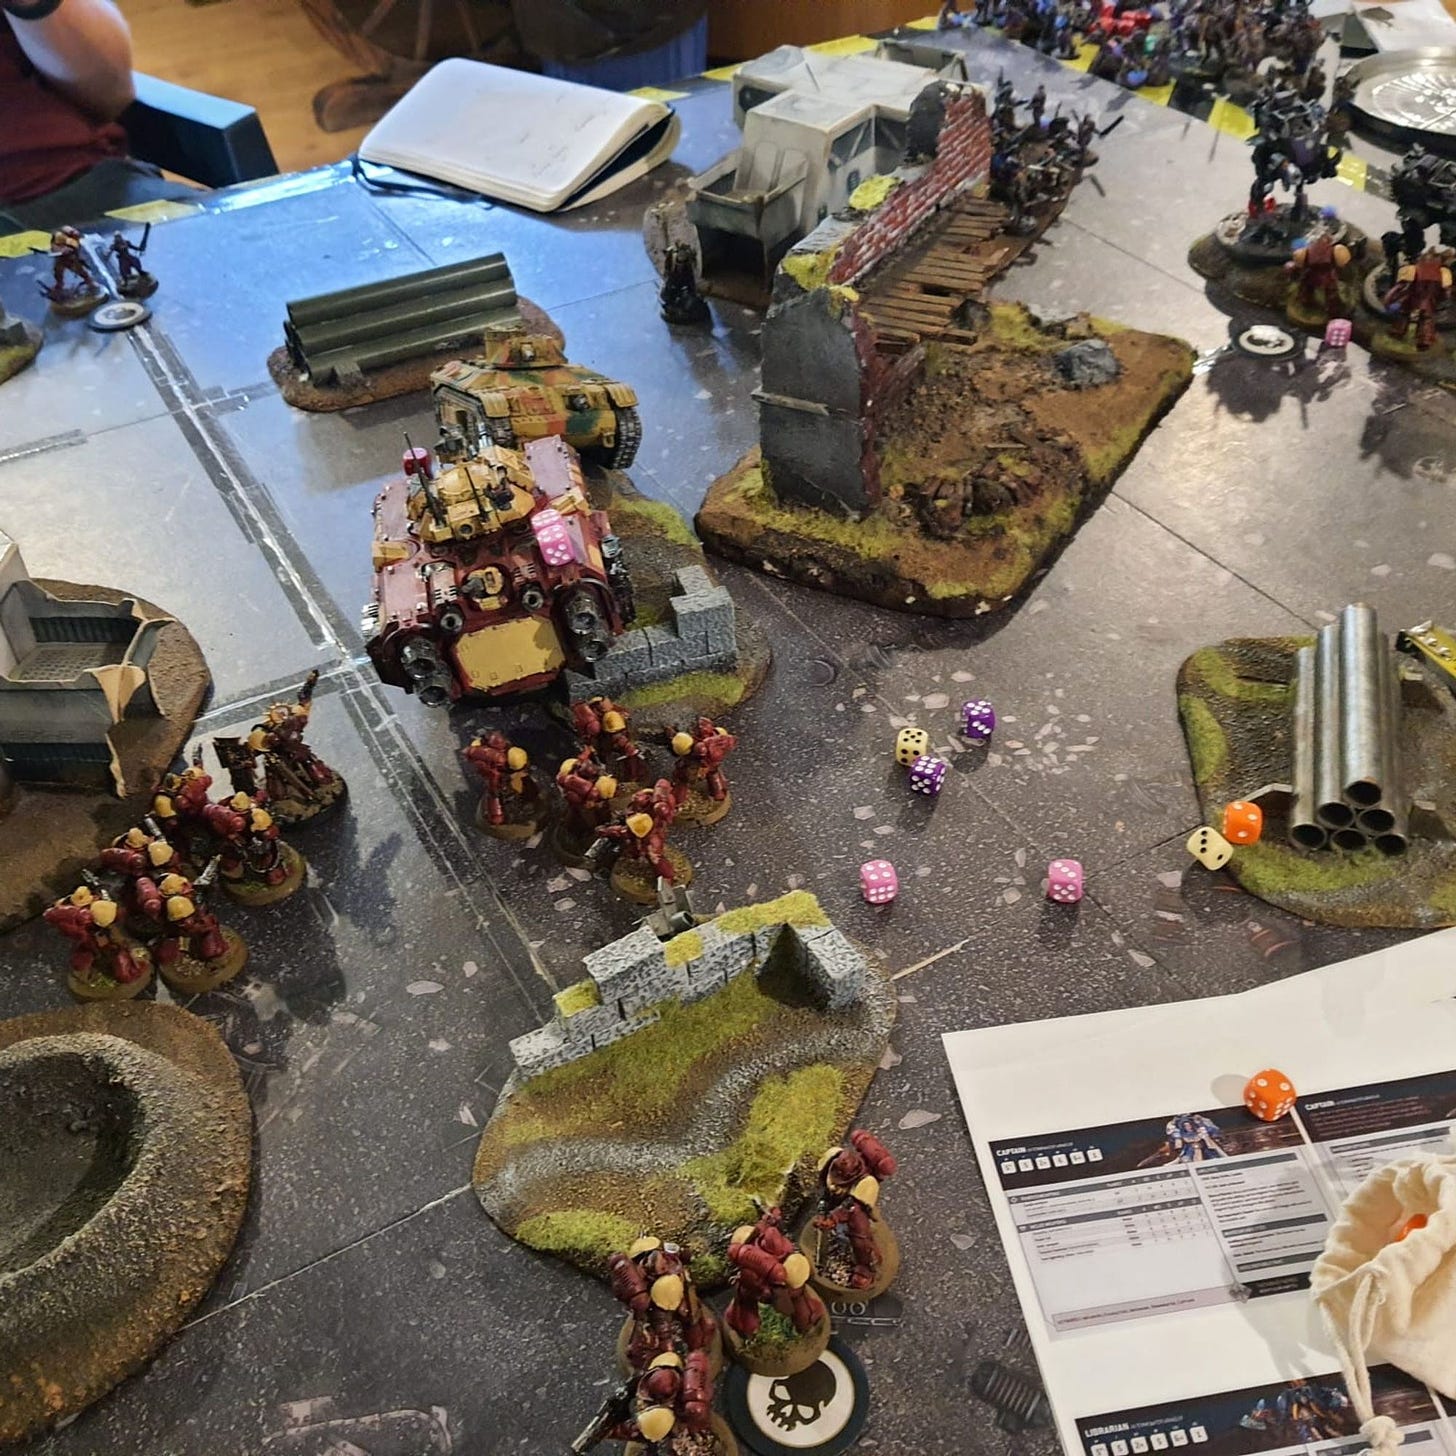 A bird's eye view of a Warhemmer 40k battle. At the bottom of the picture, a Infernus squad (which was physically standing in for a Desolation squad) holds an objective, covered by an incomplete wall and having lost one of its initial 5 members. At the centre of the picture, we have the Chimera and the Repulsor from the previous picture, which is floating above a small wall. Behind the Repulsor, we have the Sternguard veterans from the first picture and an Infernus squad. On the top left, a Lieutenant with Combi-Weapon (a human in power armour wielding two blades) battles an Astra Militarum officer (a human wielding a sword), the sole survivor of his command squad. On the top right, two Terminators (humans in even bulkier power armour) and their Librarian leader melee against two Scout Sentinels. And, some distance behind the Sentinels, an infantry squad (standing in for a Death Korps squad) stands under cover behind a building.